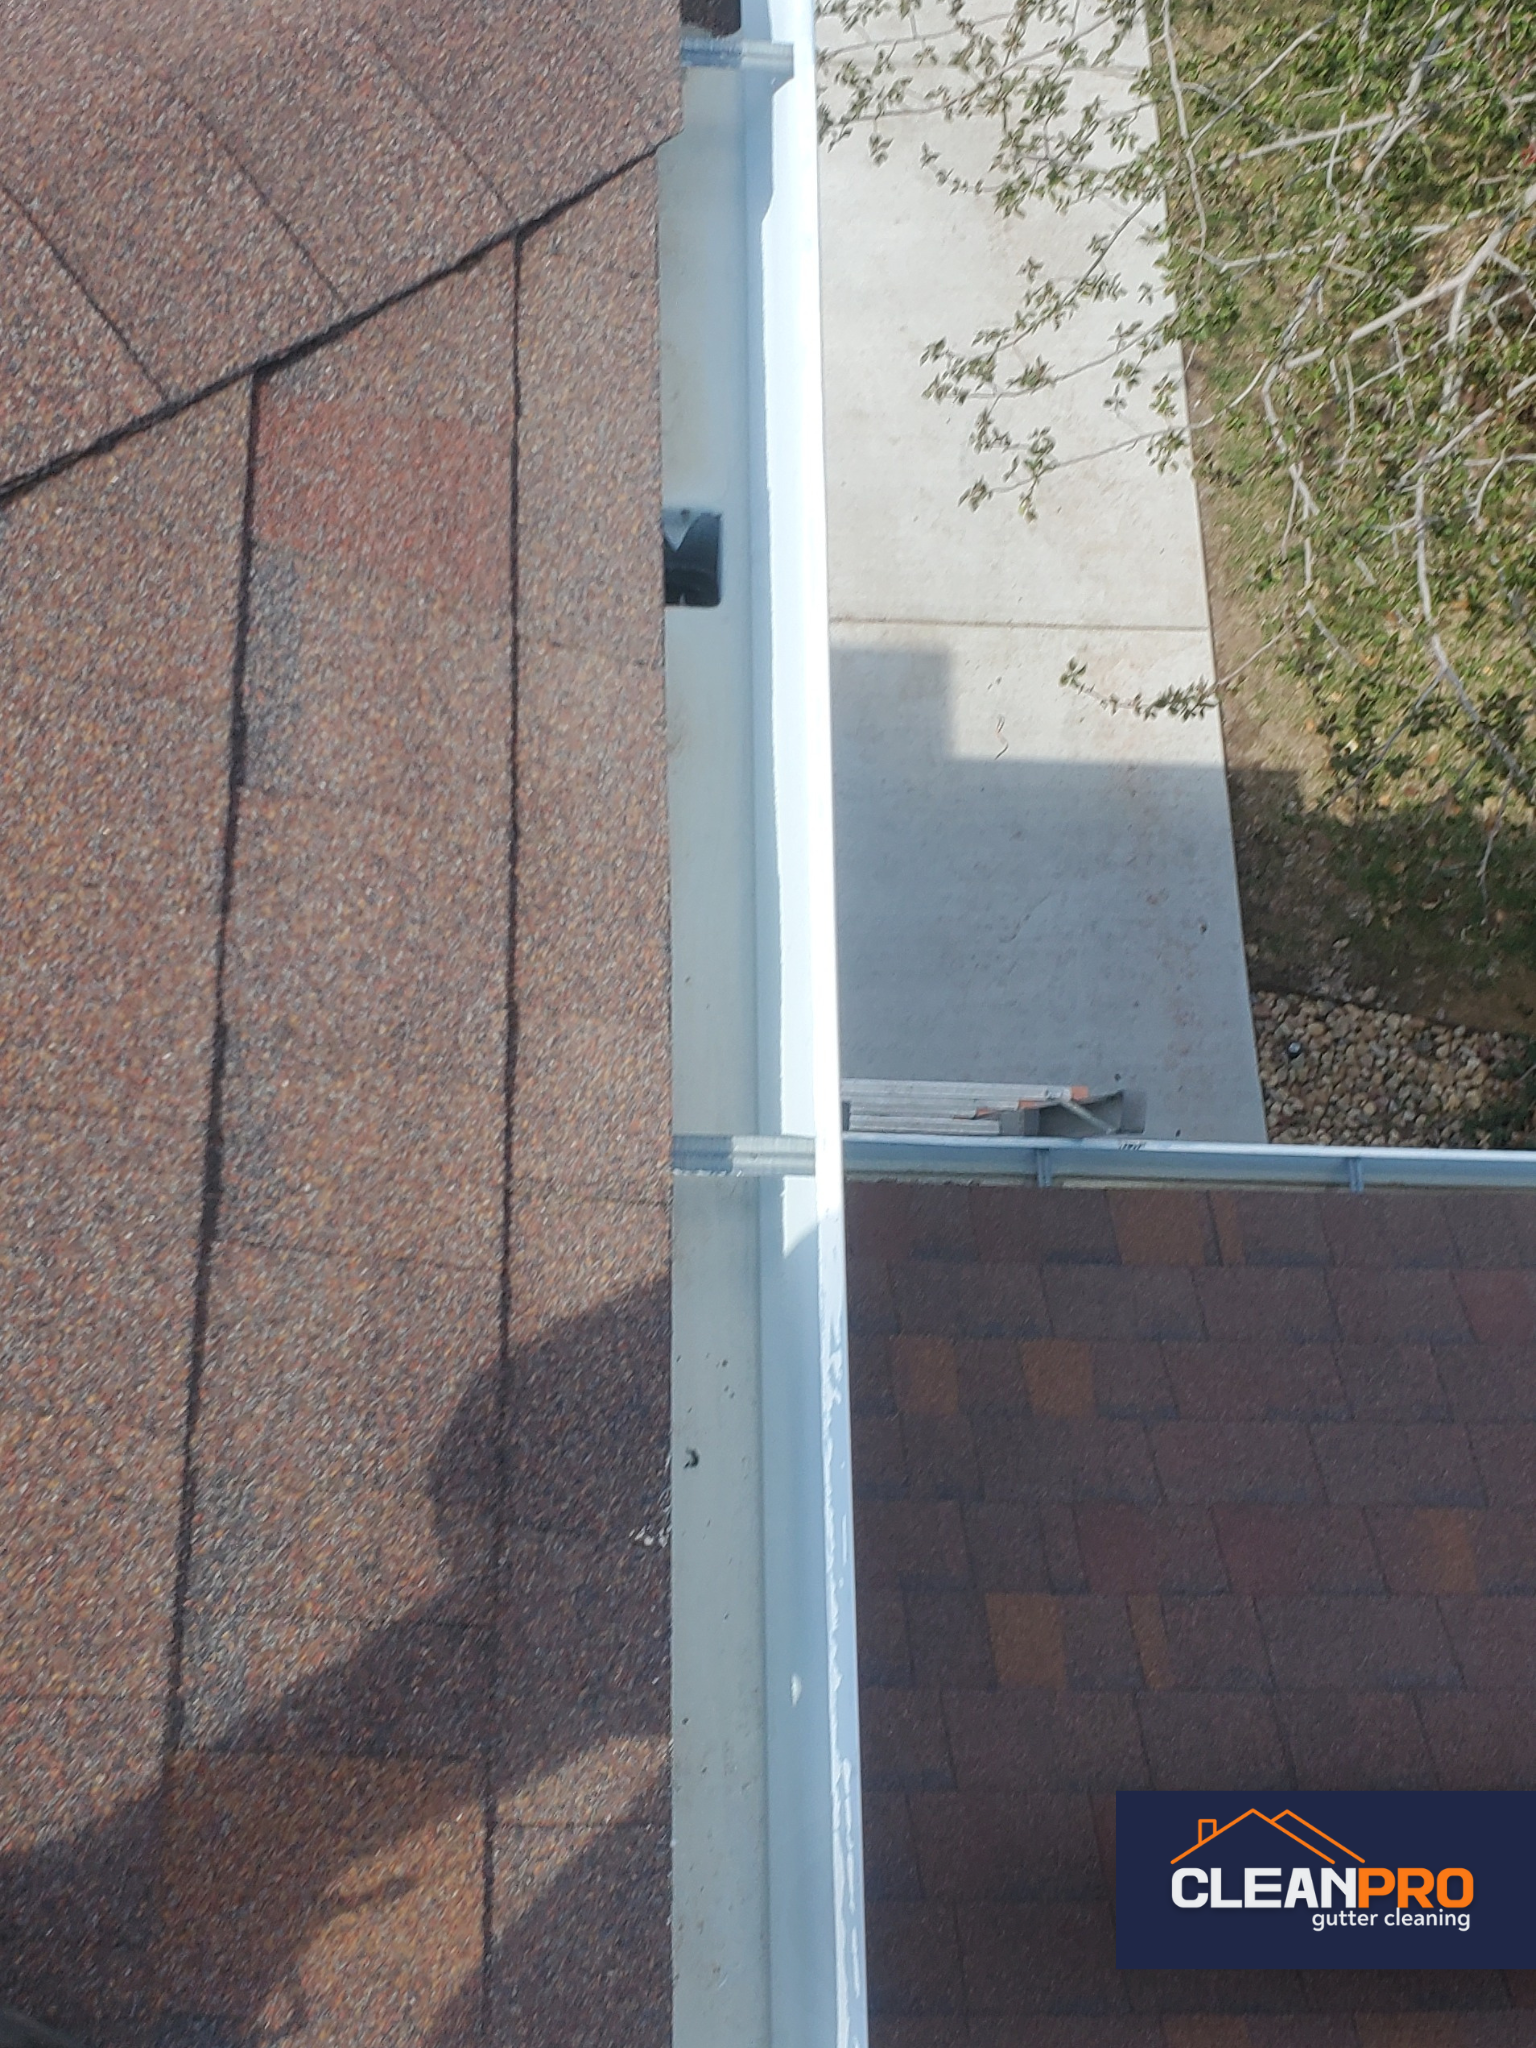 Local Gutter Cleaning in Reno, NV